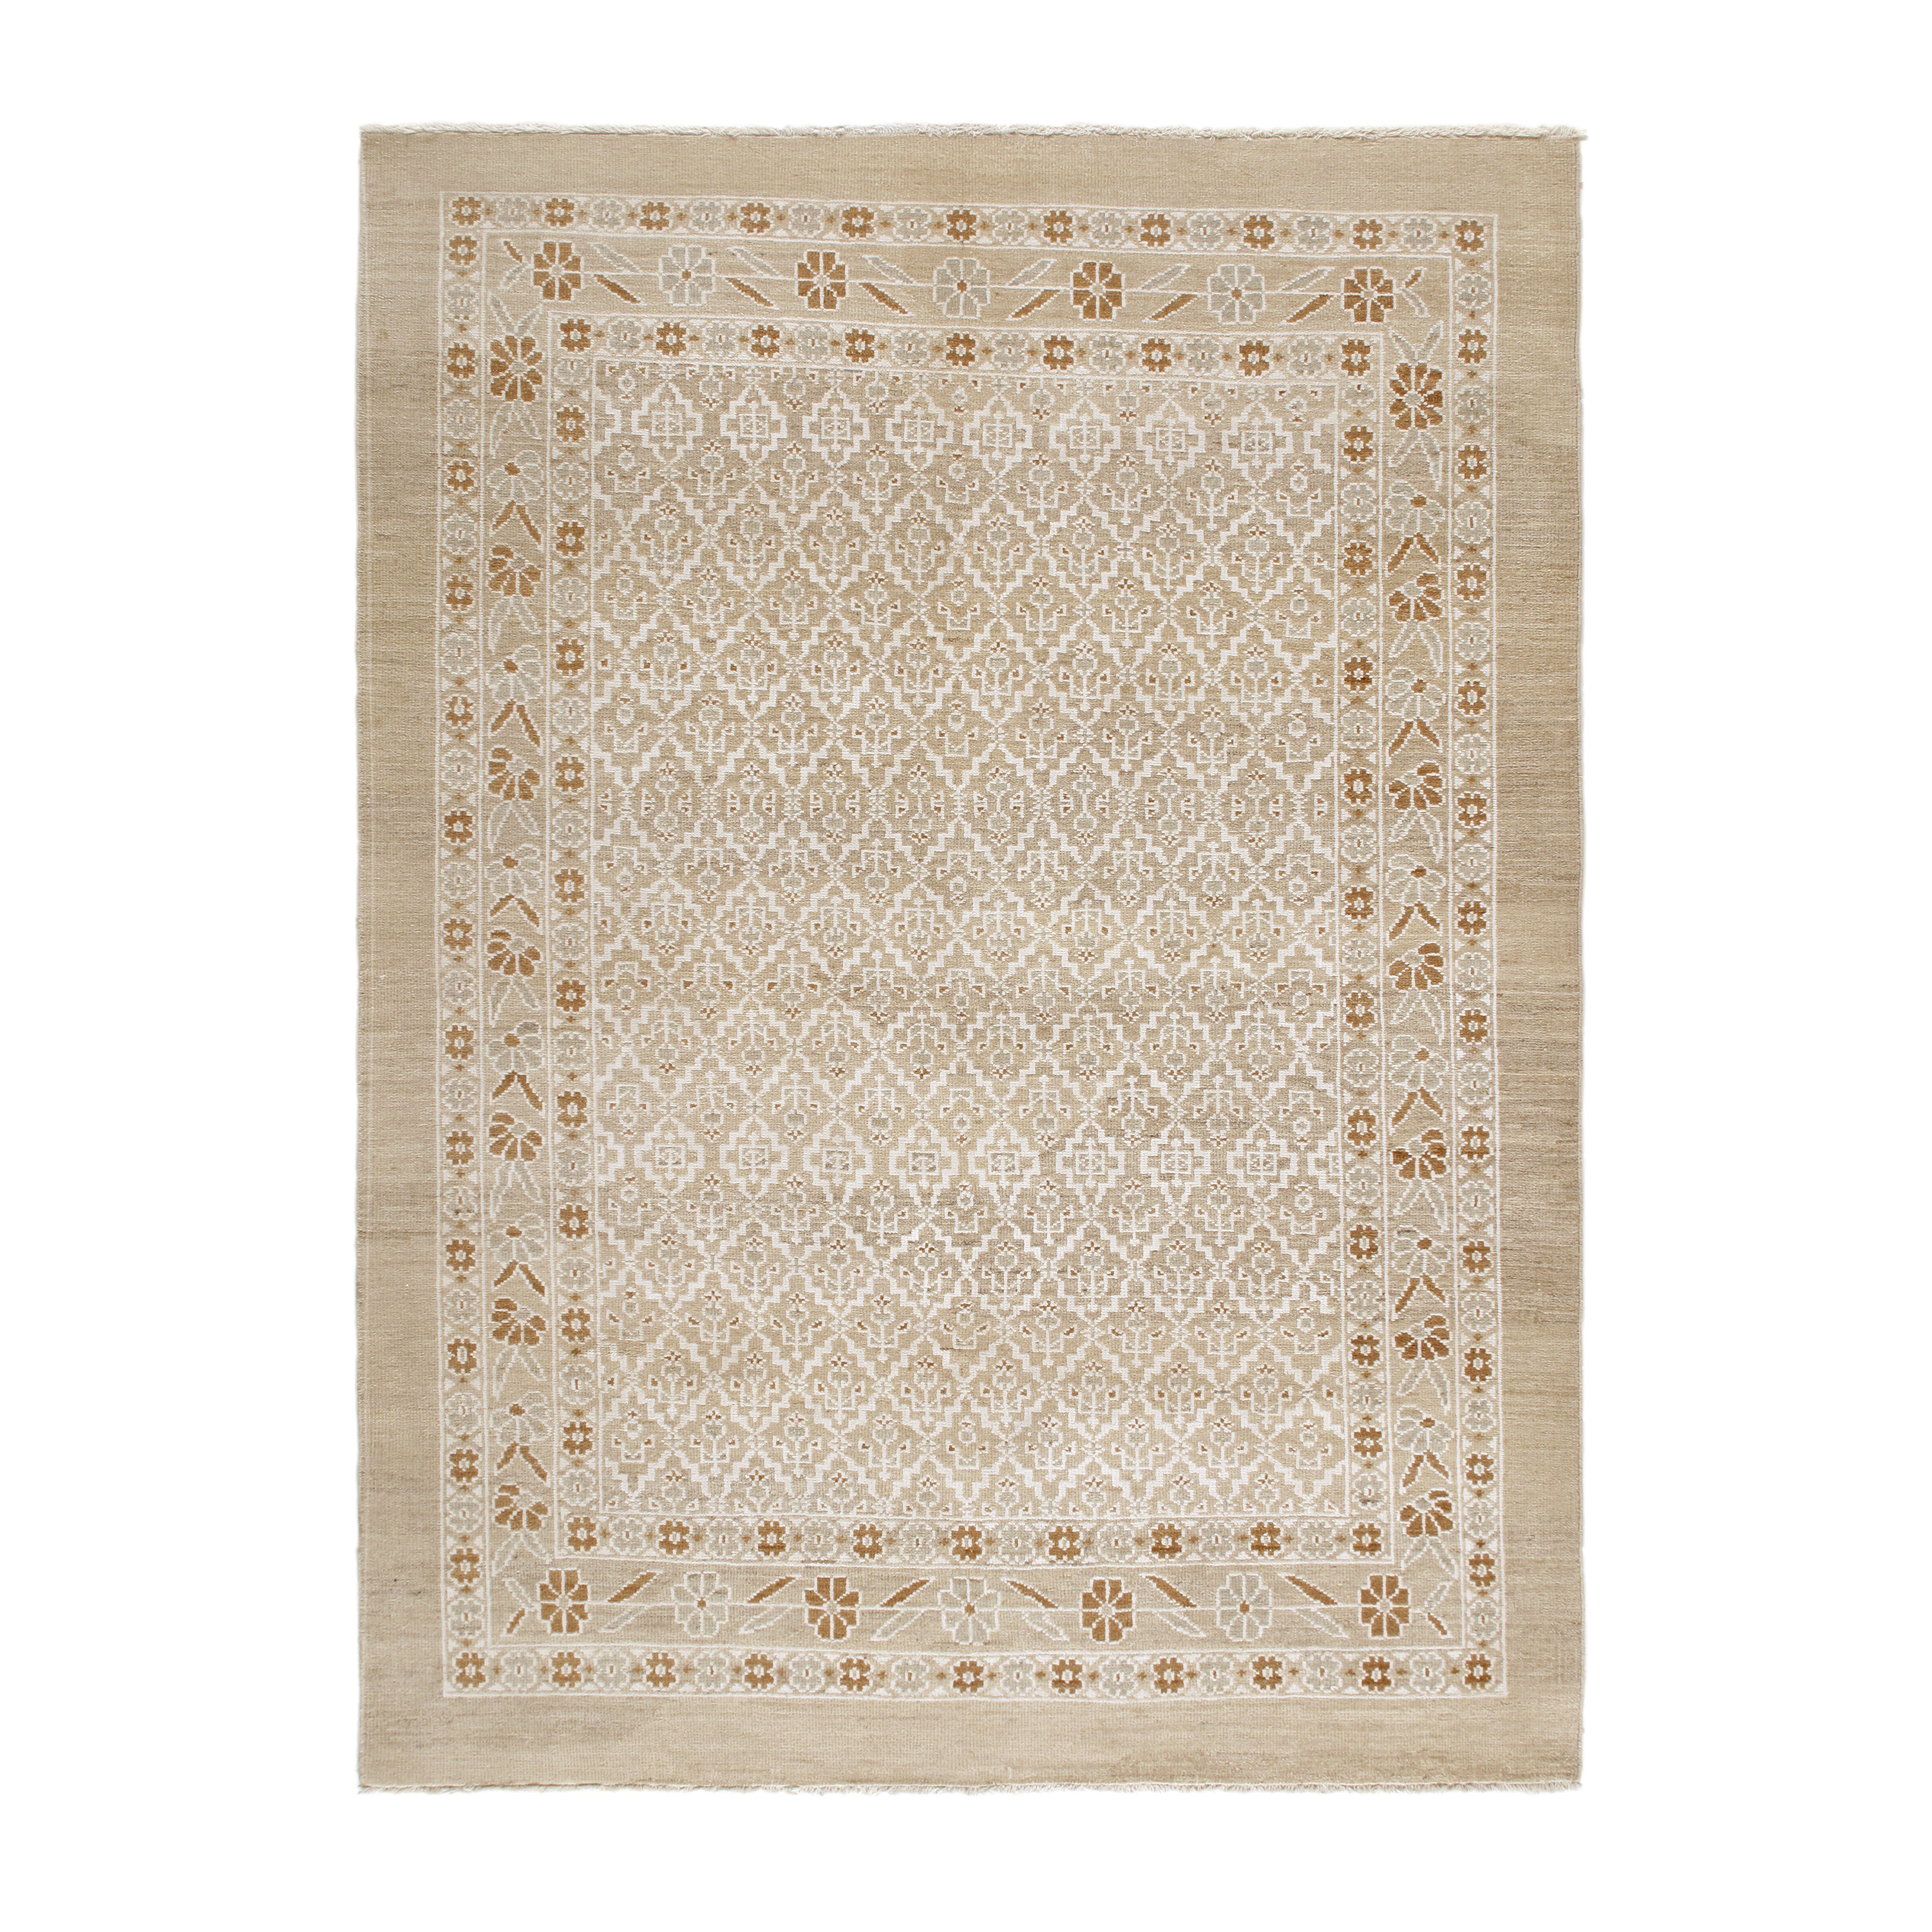 This Serab rug is hand-knotted.